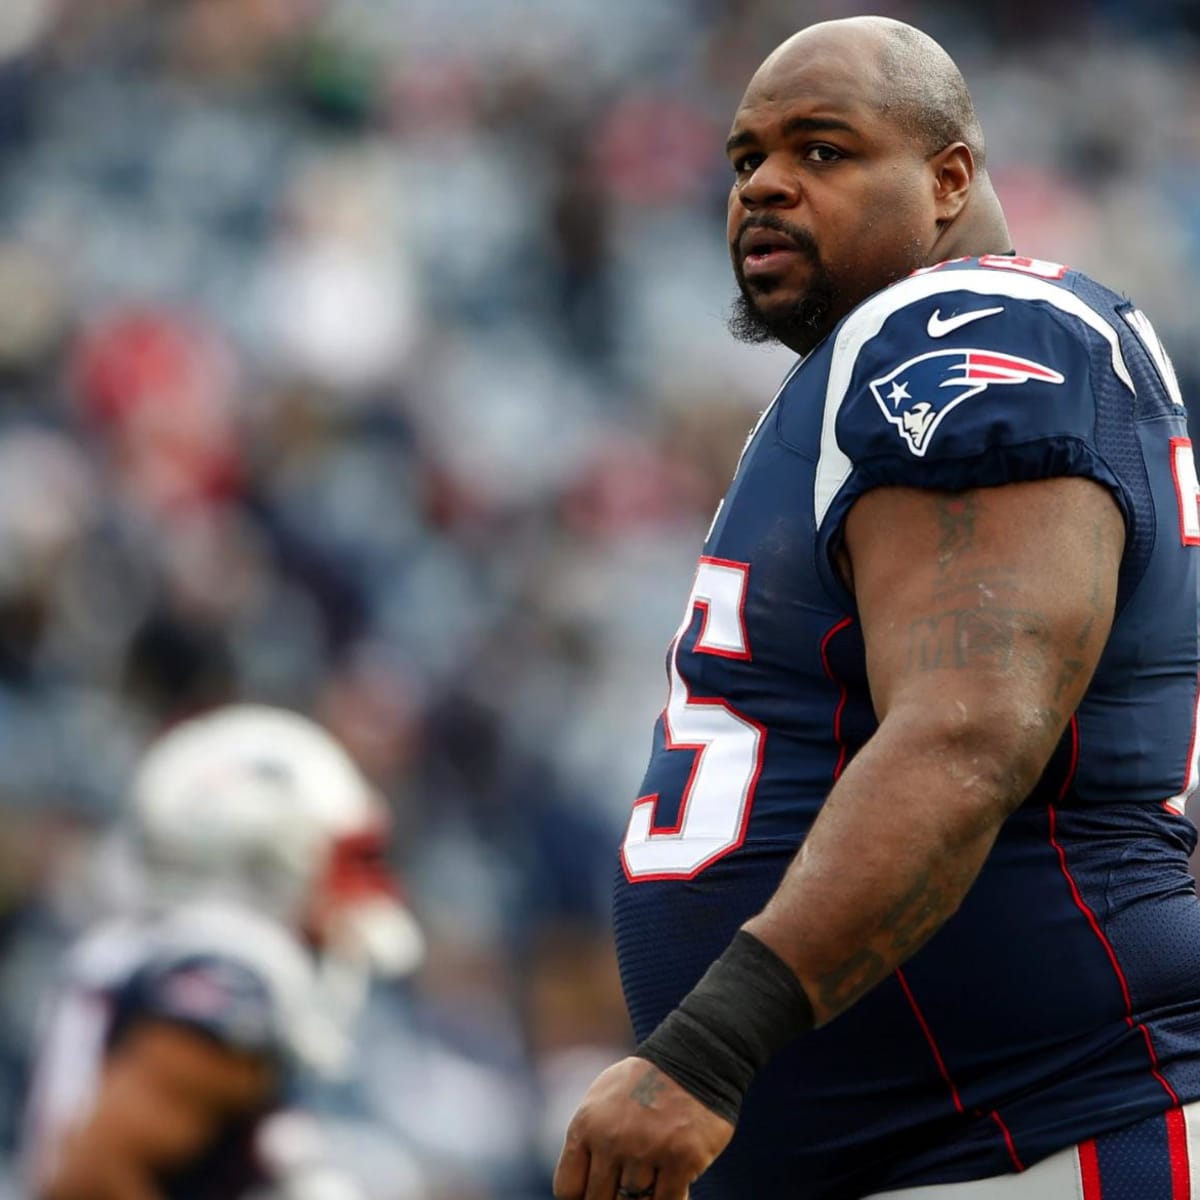 Vince Wilfork let go to seek a new place to play – Boston Herald